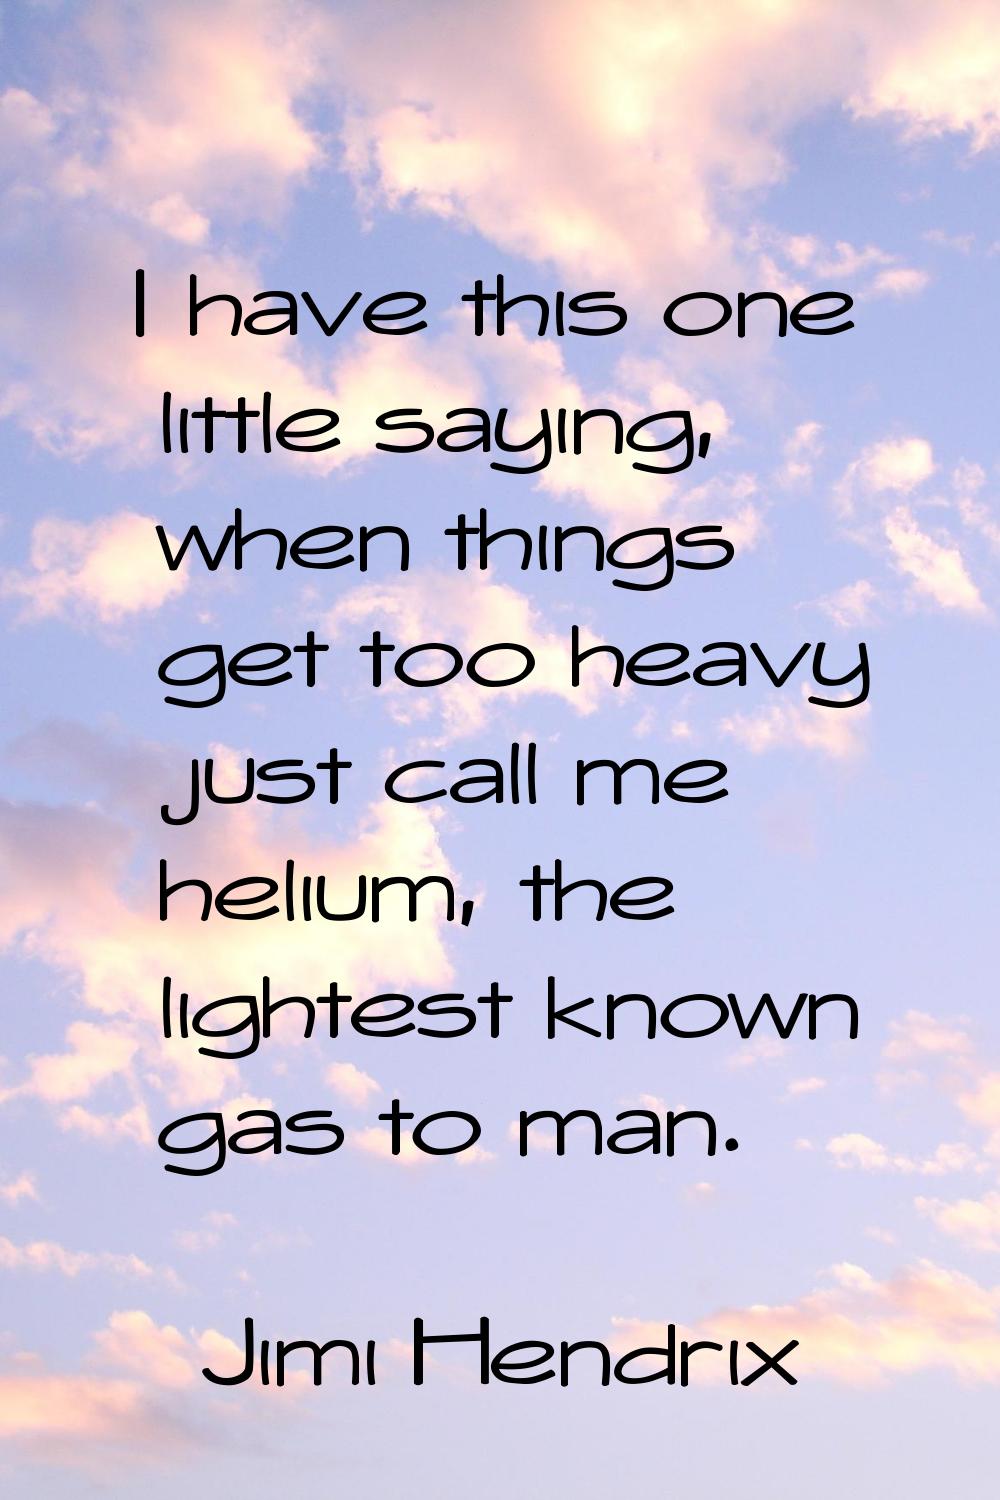 I have this one little saying, when things get too heavy just call me helium, the lightest known ga